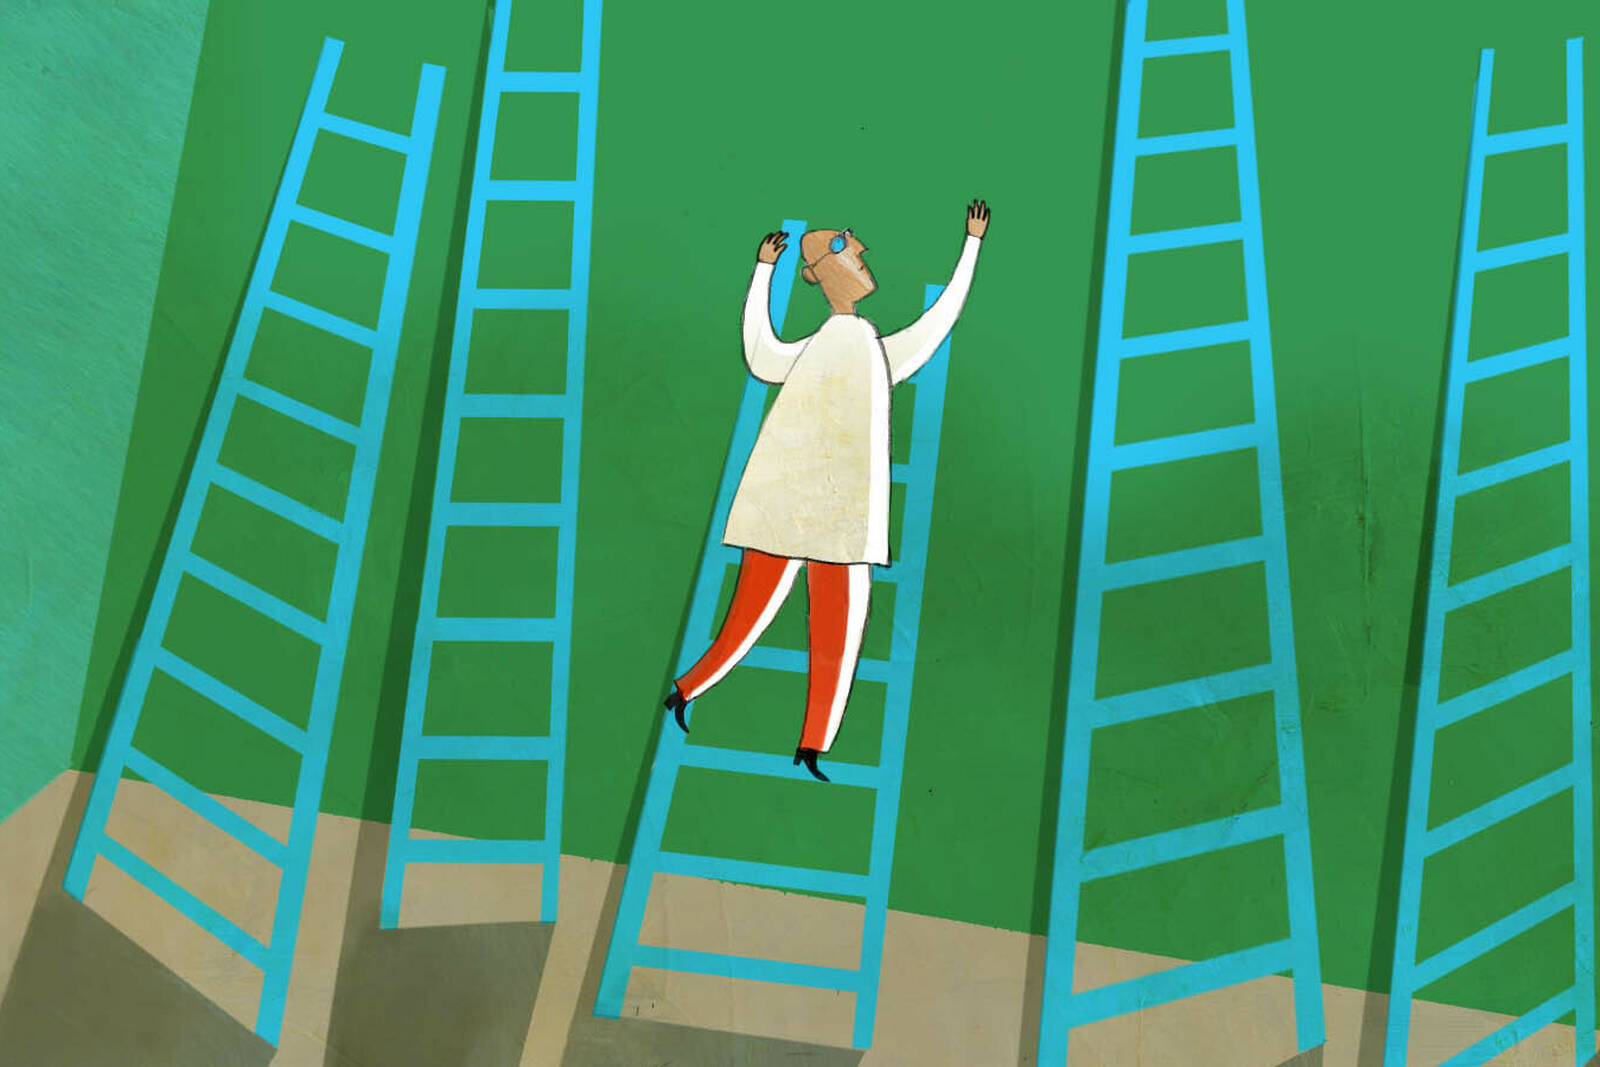 person climbing a small ladder against a wall with longer ladders